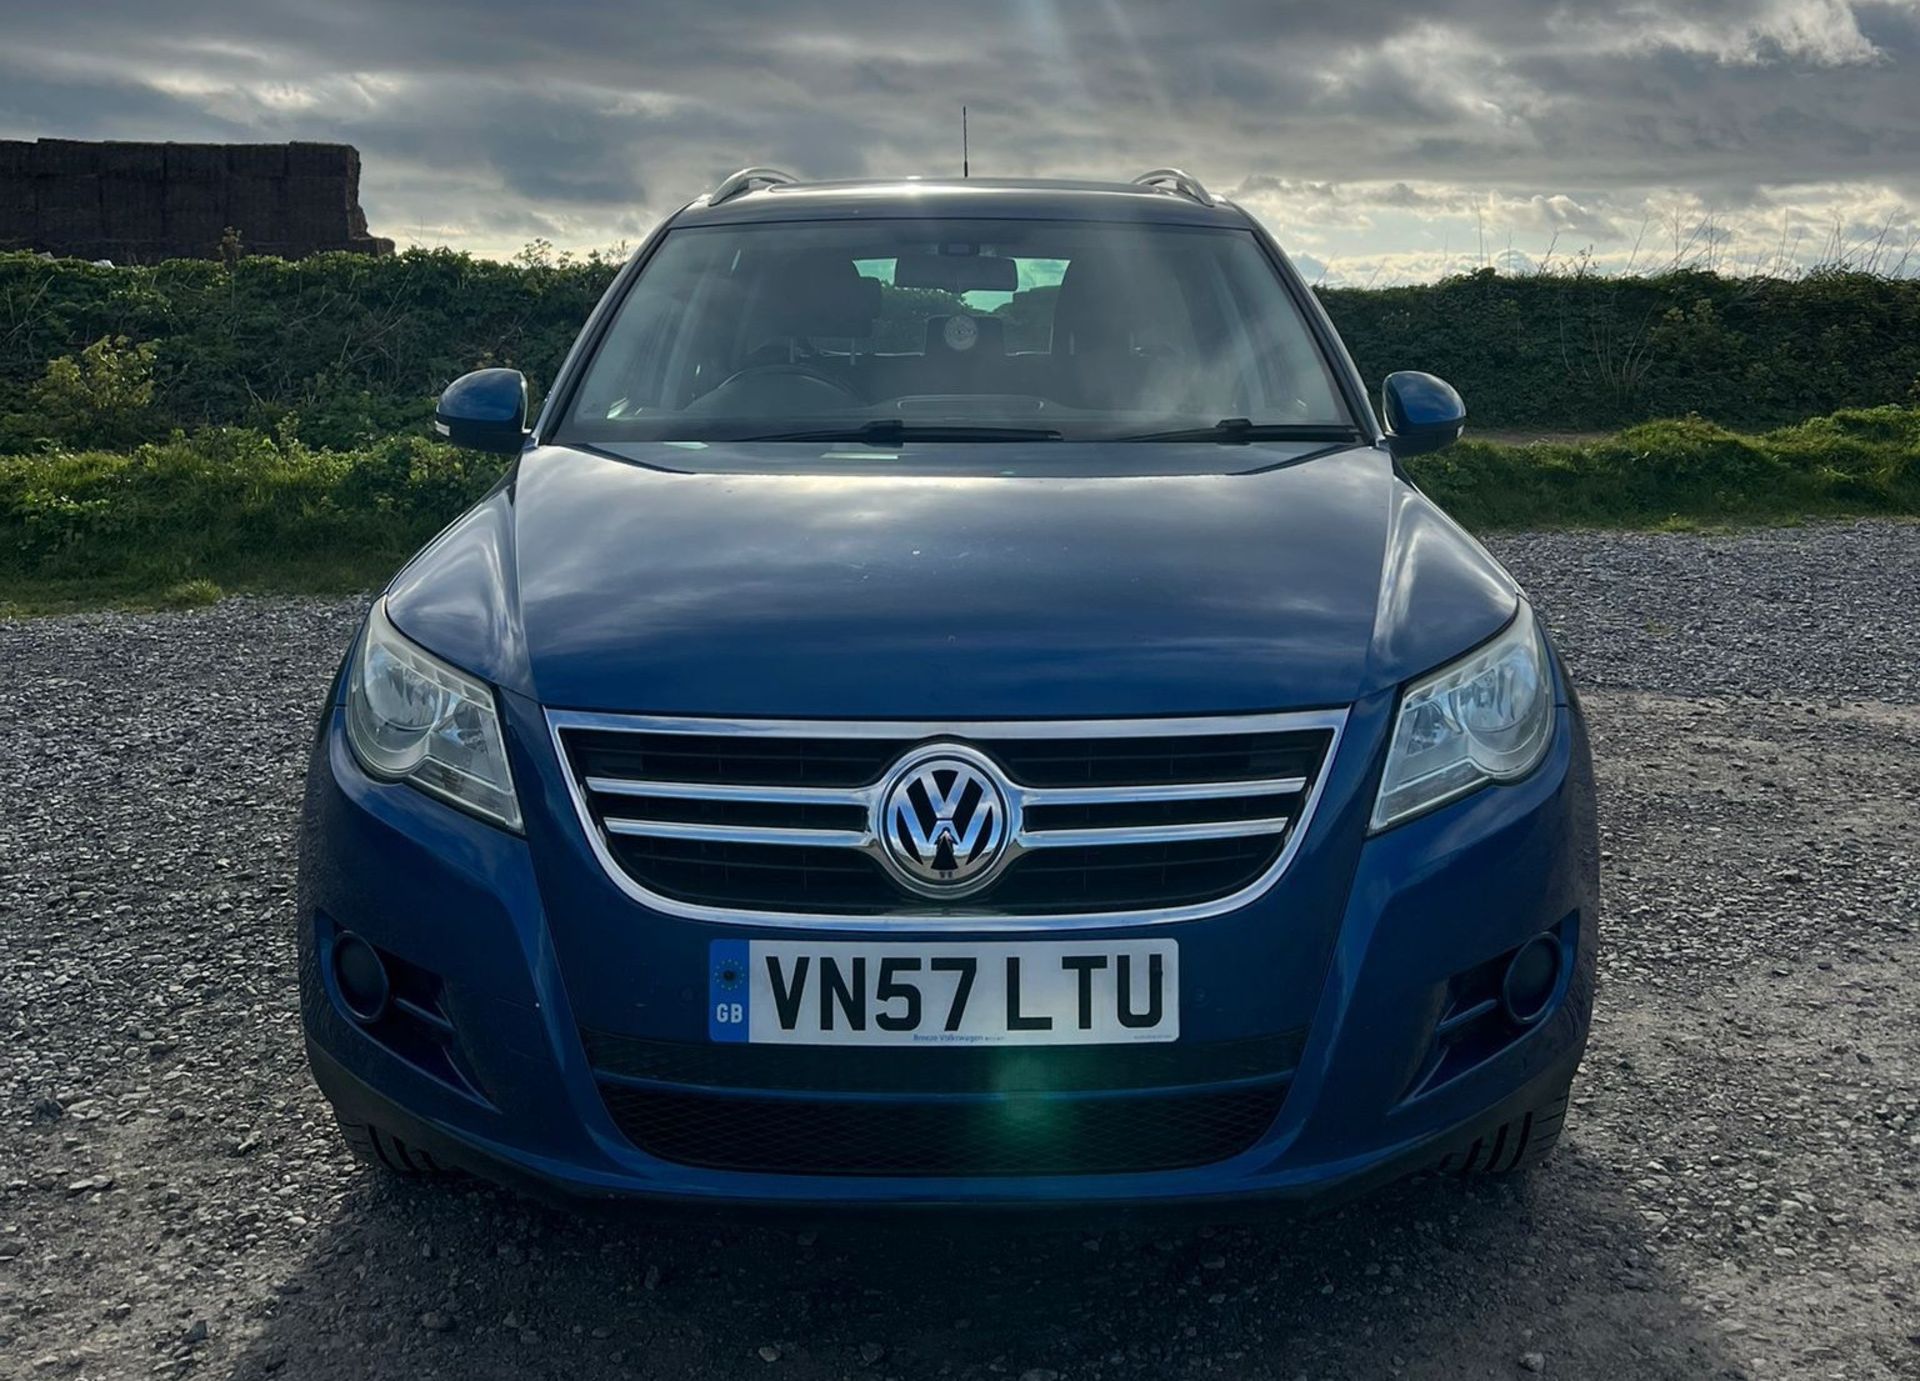 2008 Volkswagen Tiguan SE Tdi 140 - Sport pan roof with 12 months MOT - Offered at No Reserve - Image 4 of 16